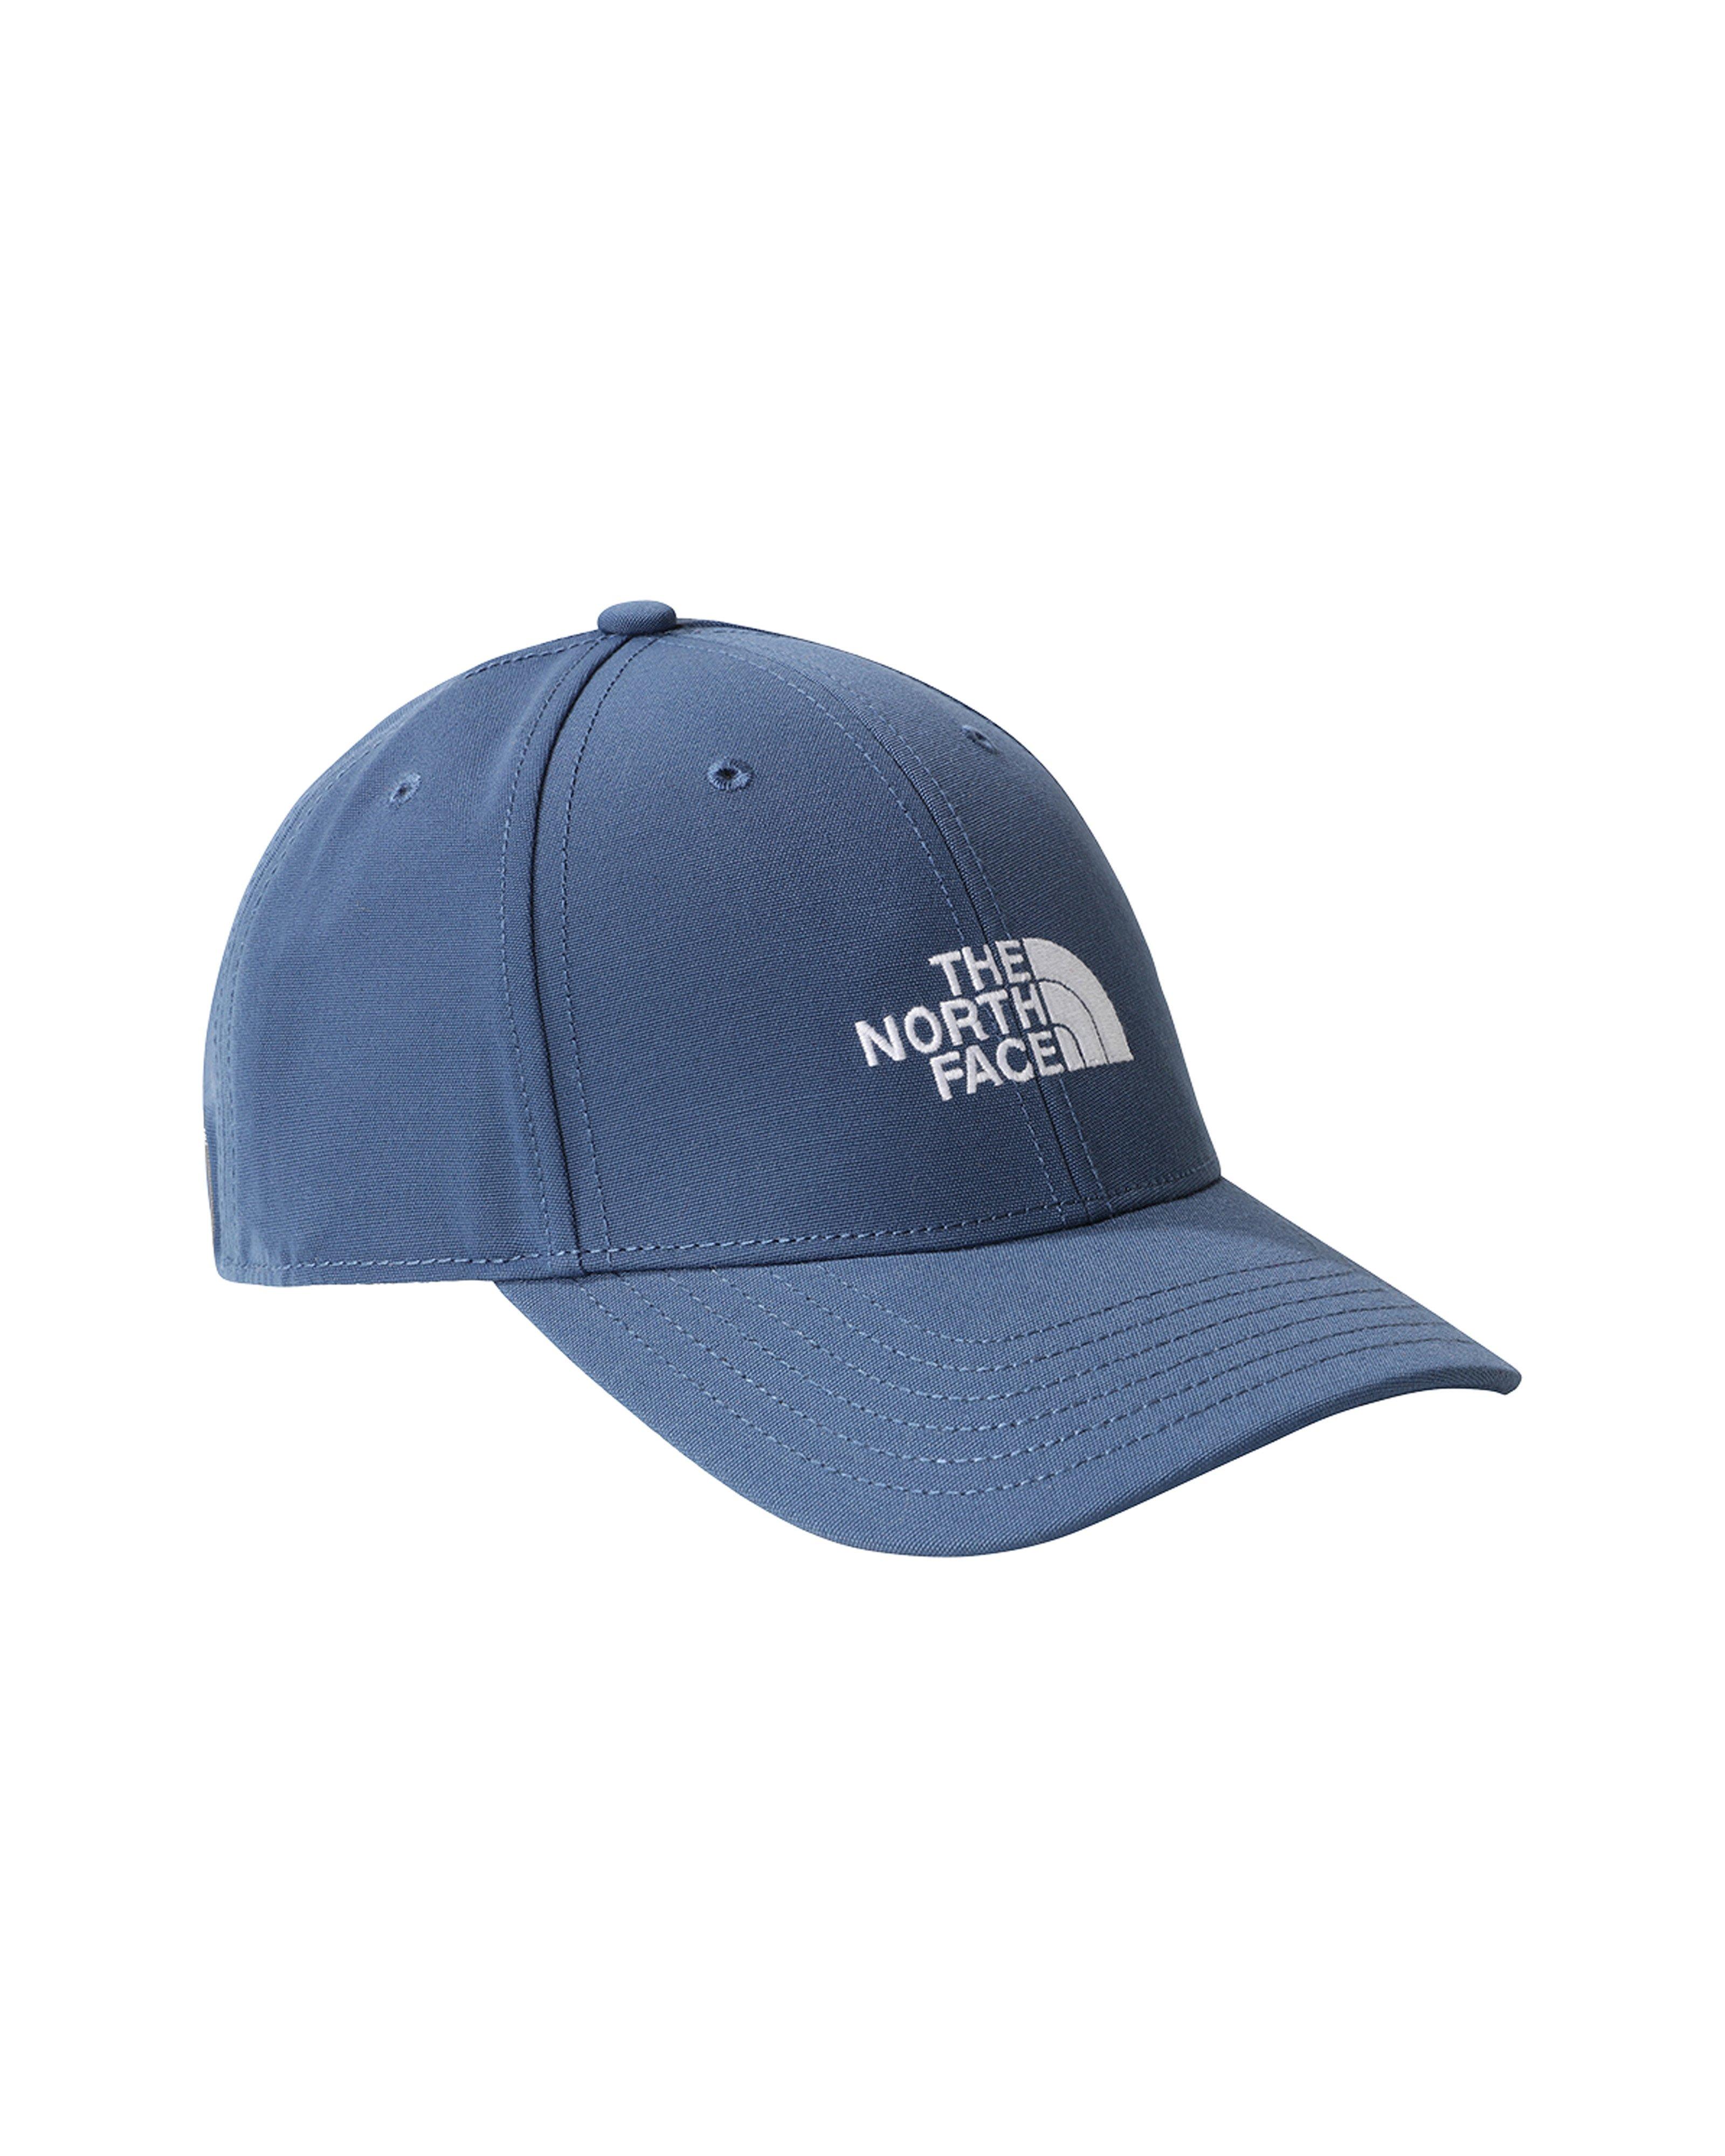 The North Face Kids Classic Recycled ‘66 Hat -  Blue